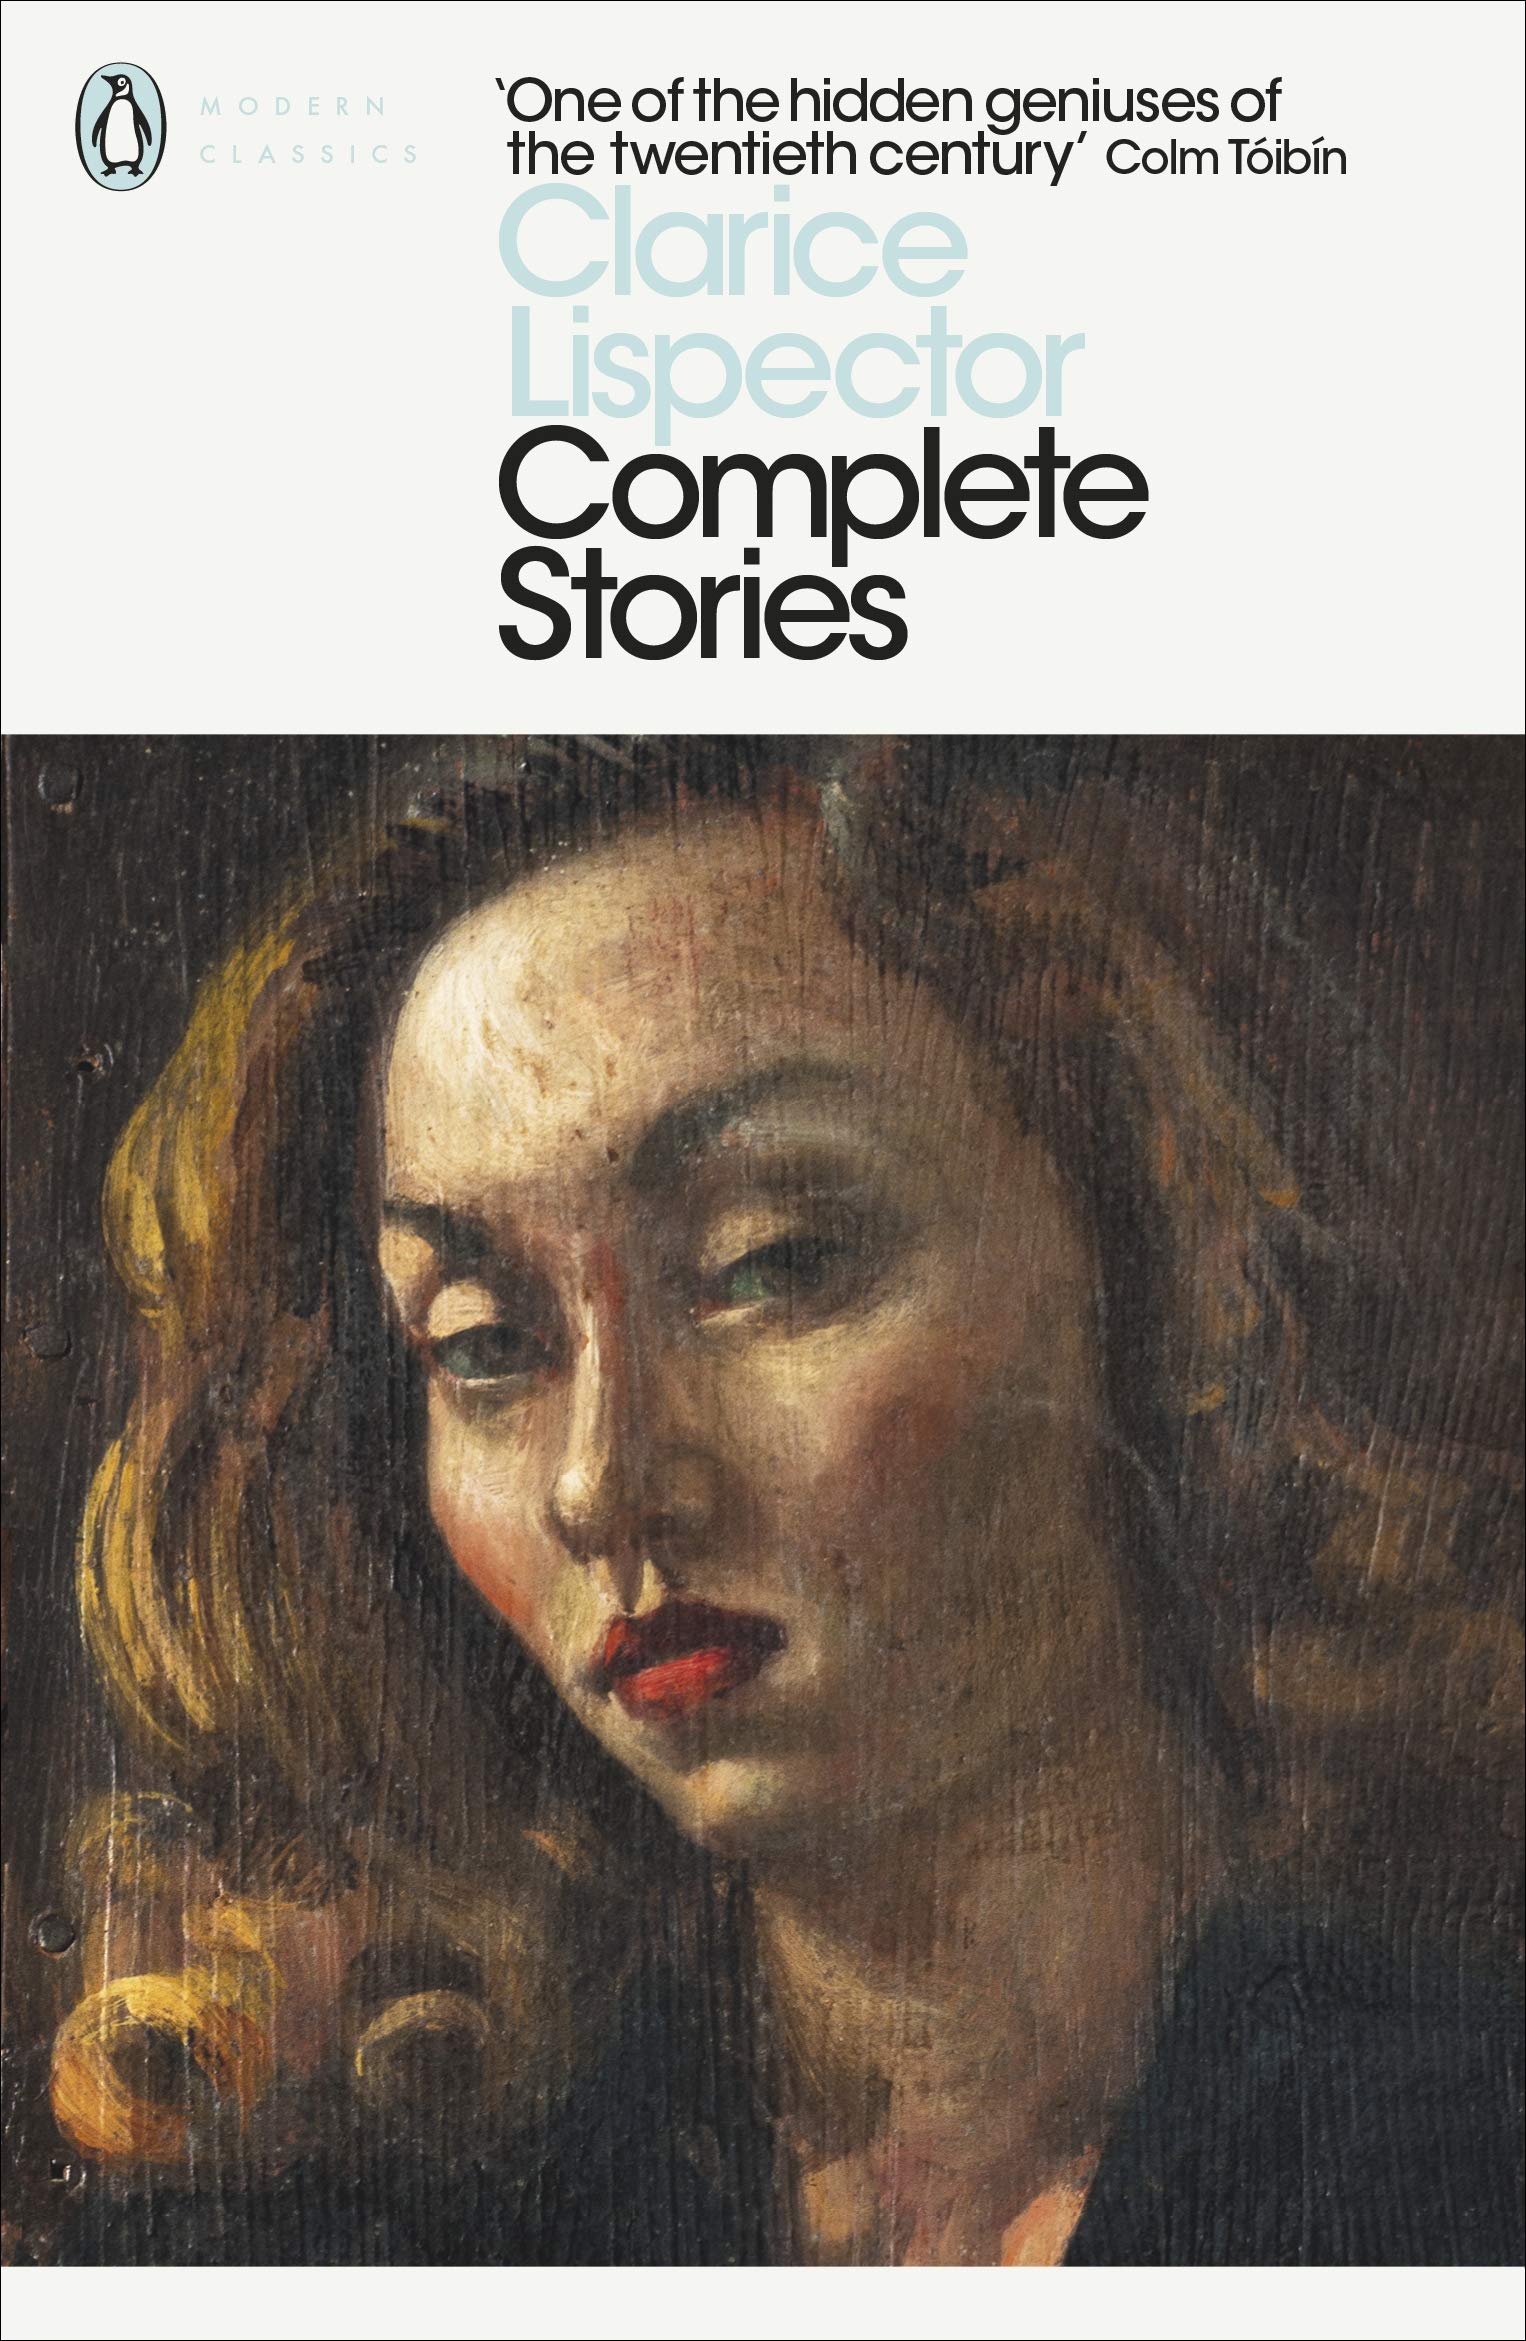 The Complete Stories by Clarice Lispector